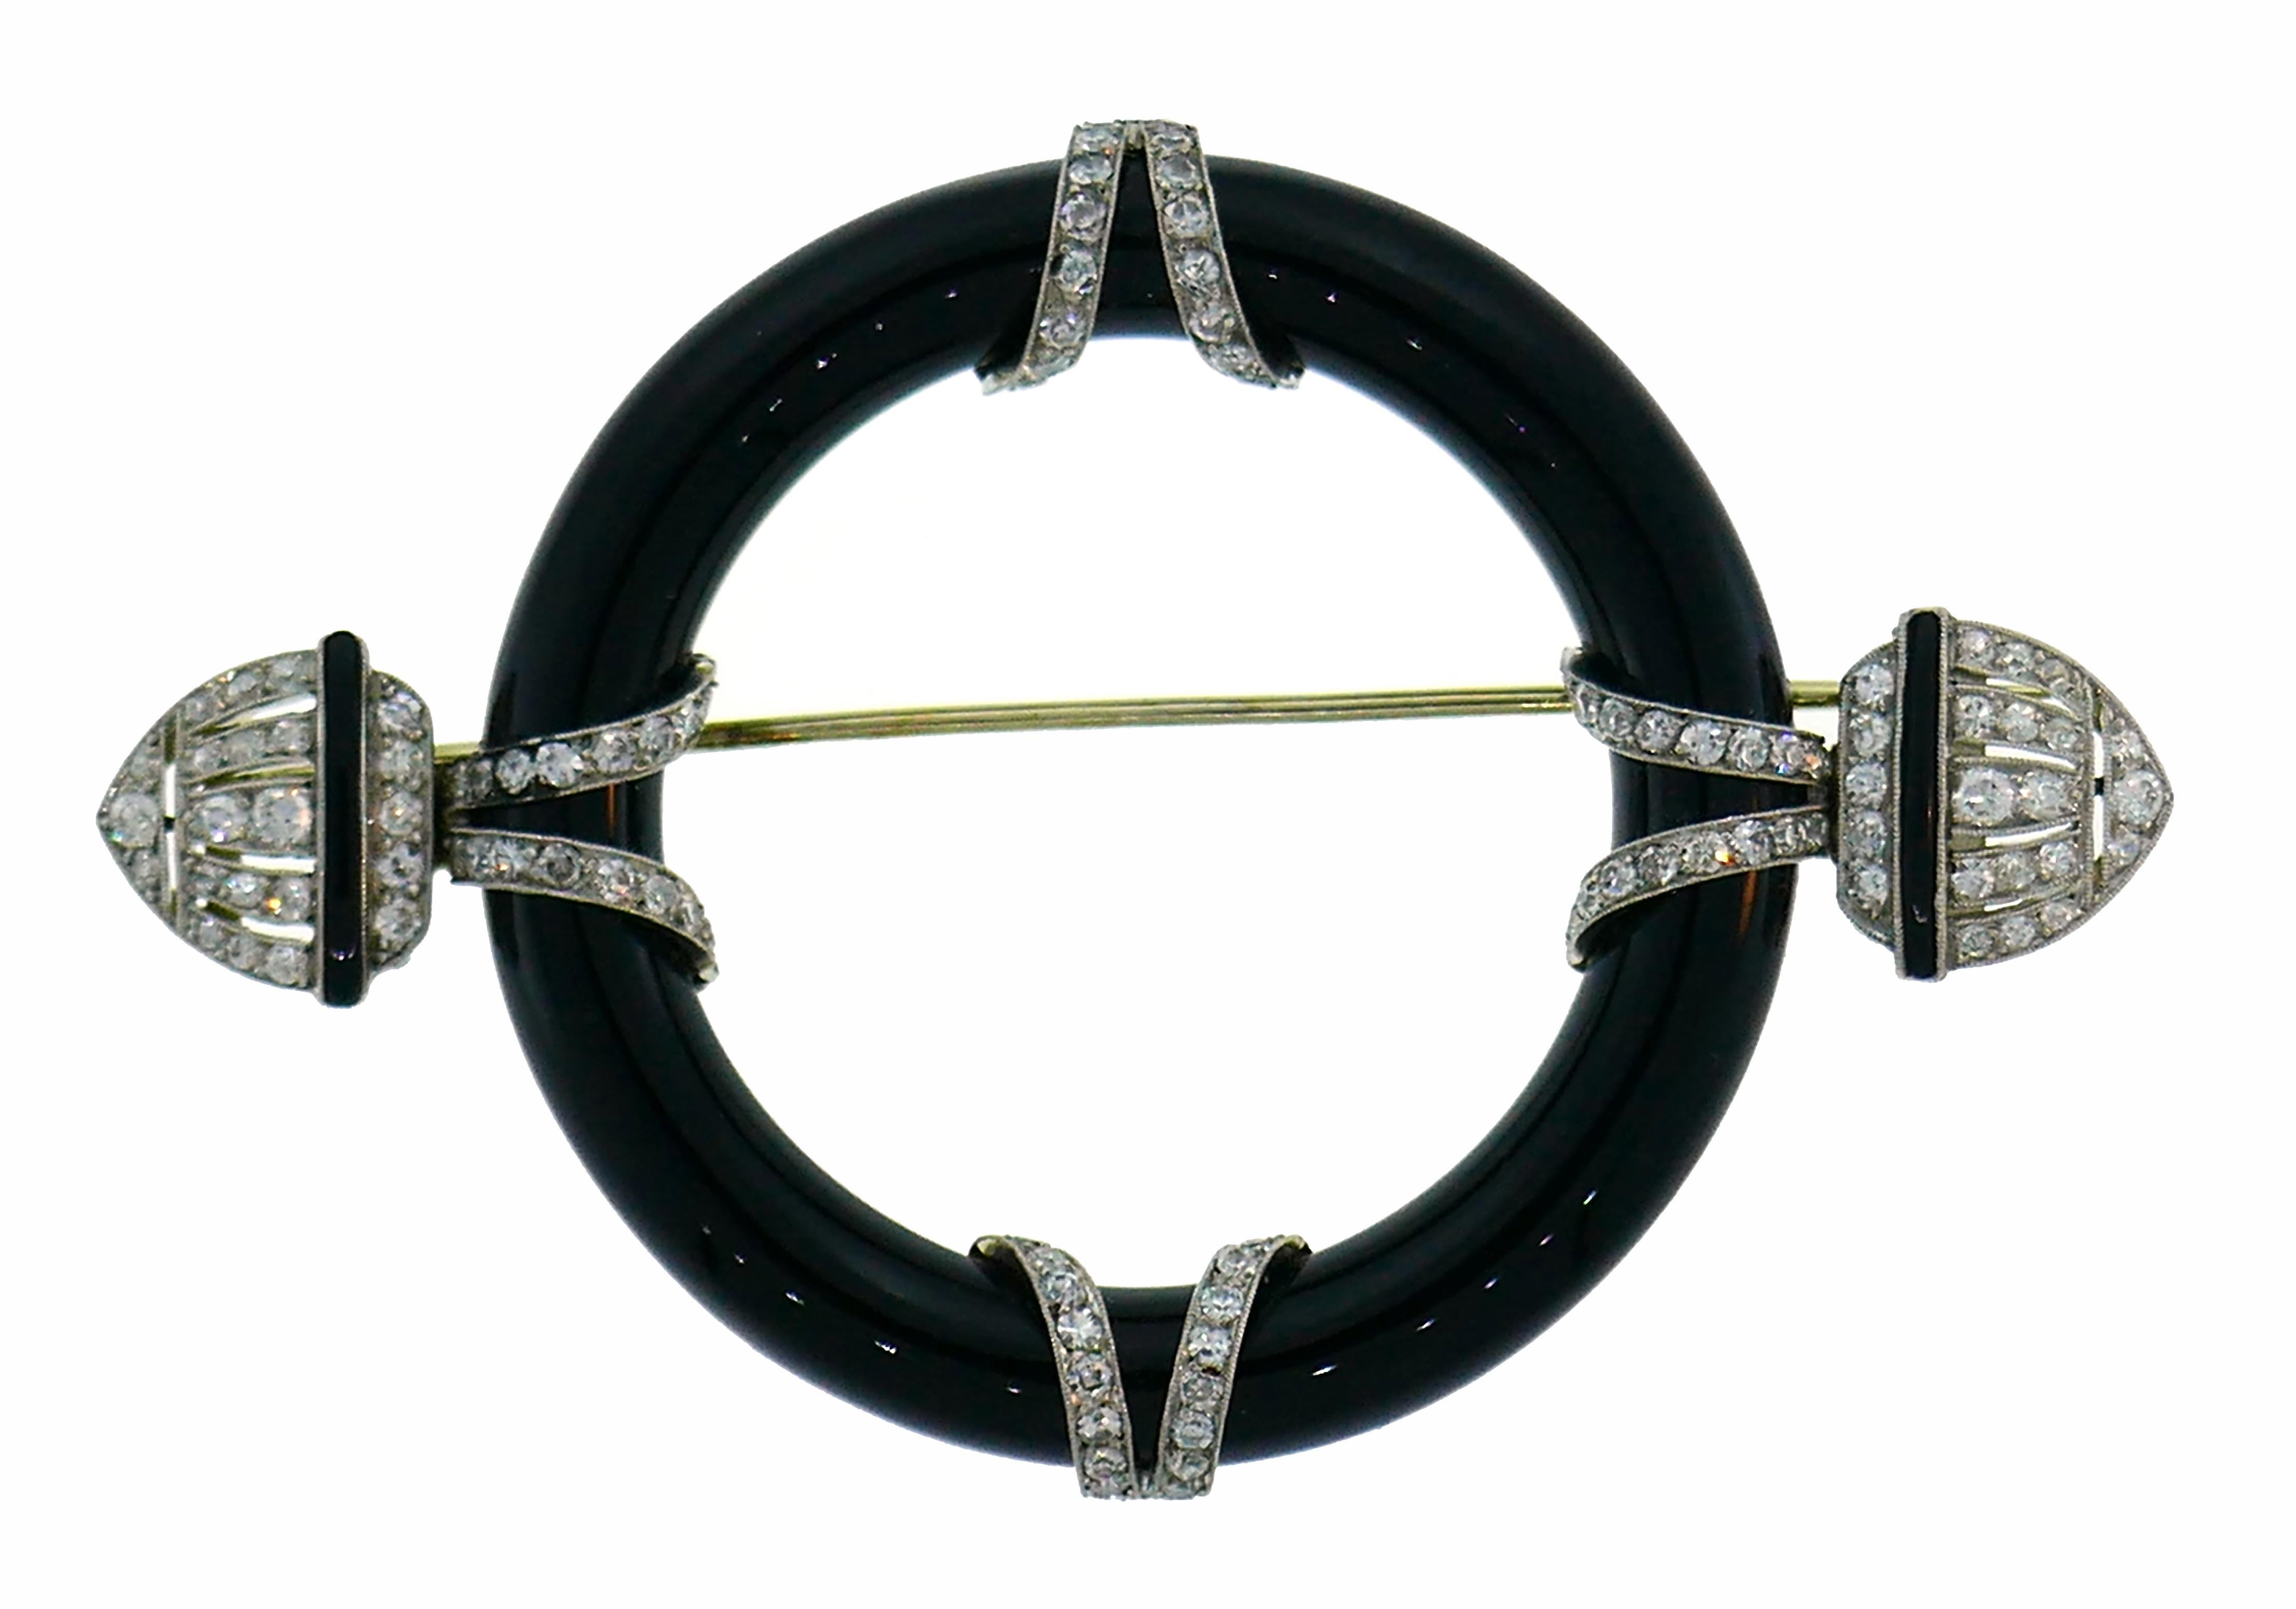 Classy and elegant Art Deco brooch created in the 1910s. 
The pin is made of platinum, black onyx and accented with Old European and single cut diamonds (H-J color VS clarity, total weight approximately 2.20 carats). The back of the brooch is made